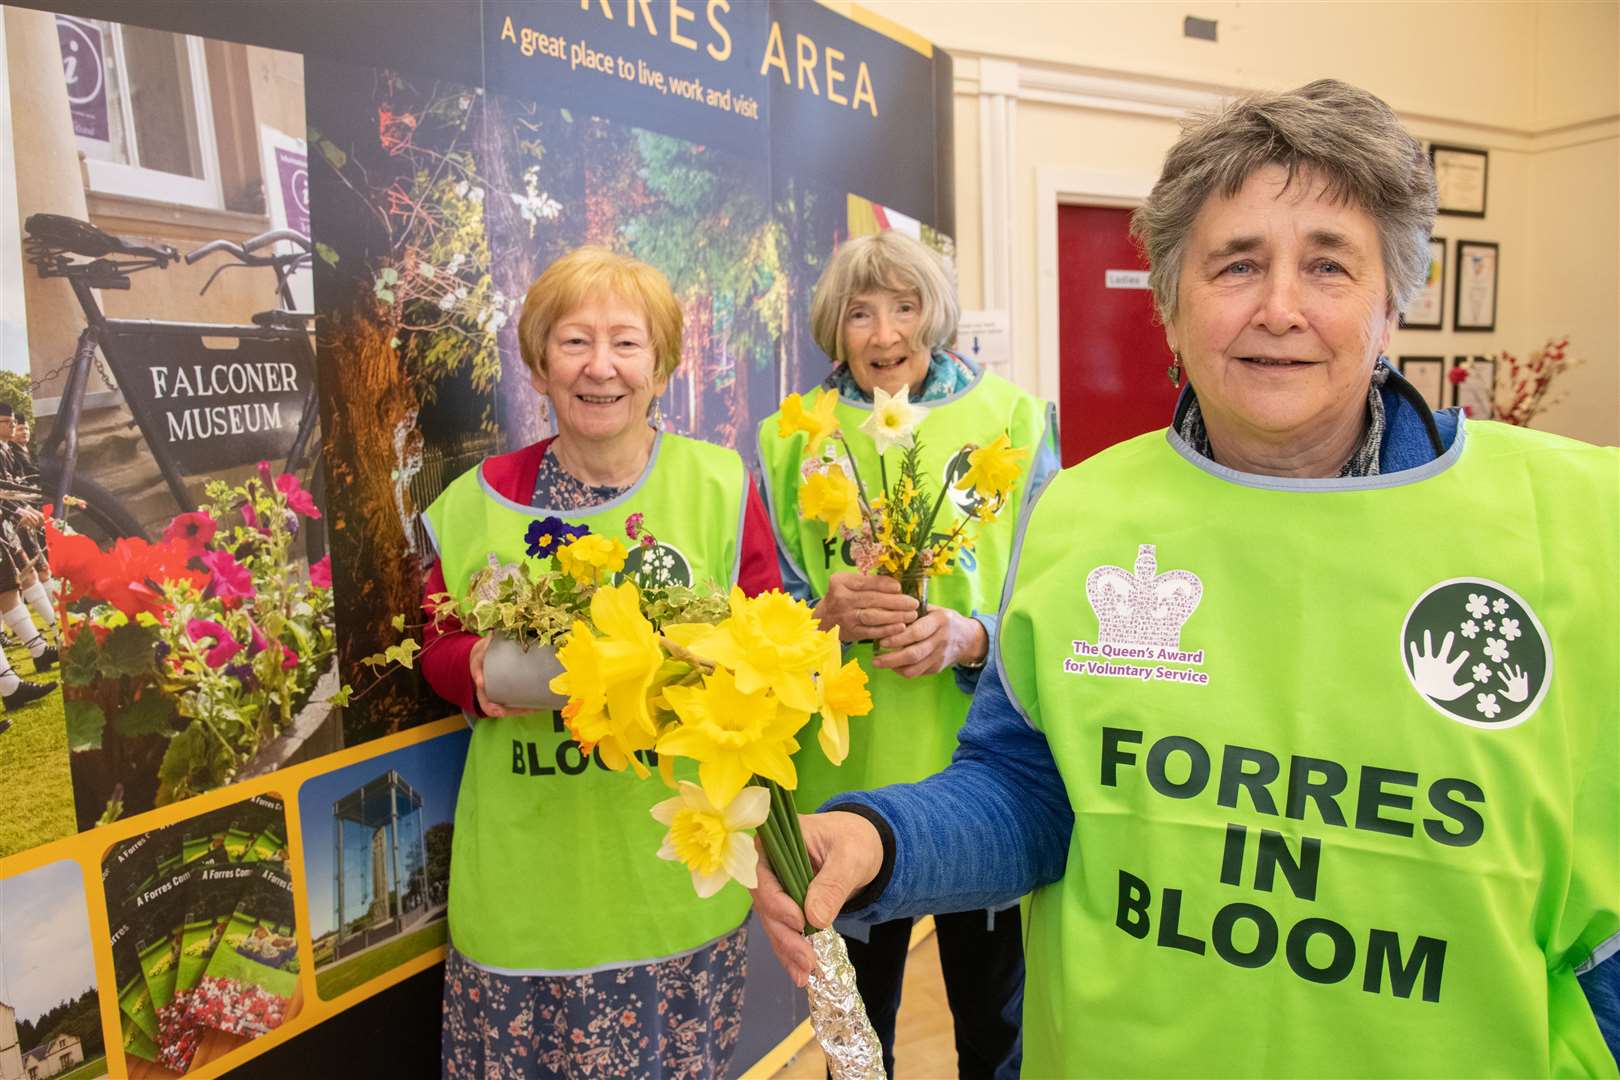 Forres in Bloom members Sandra Maclennan, Jenny Doig and Diane McGregor ran a stall at the last volunteer marketplace event in the town hall.